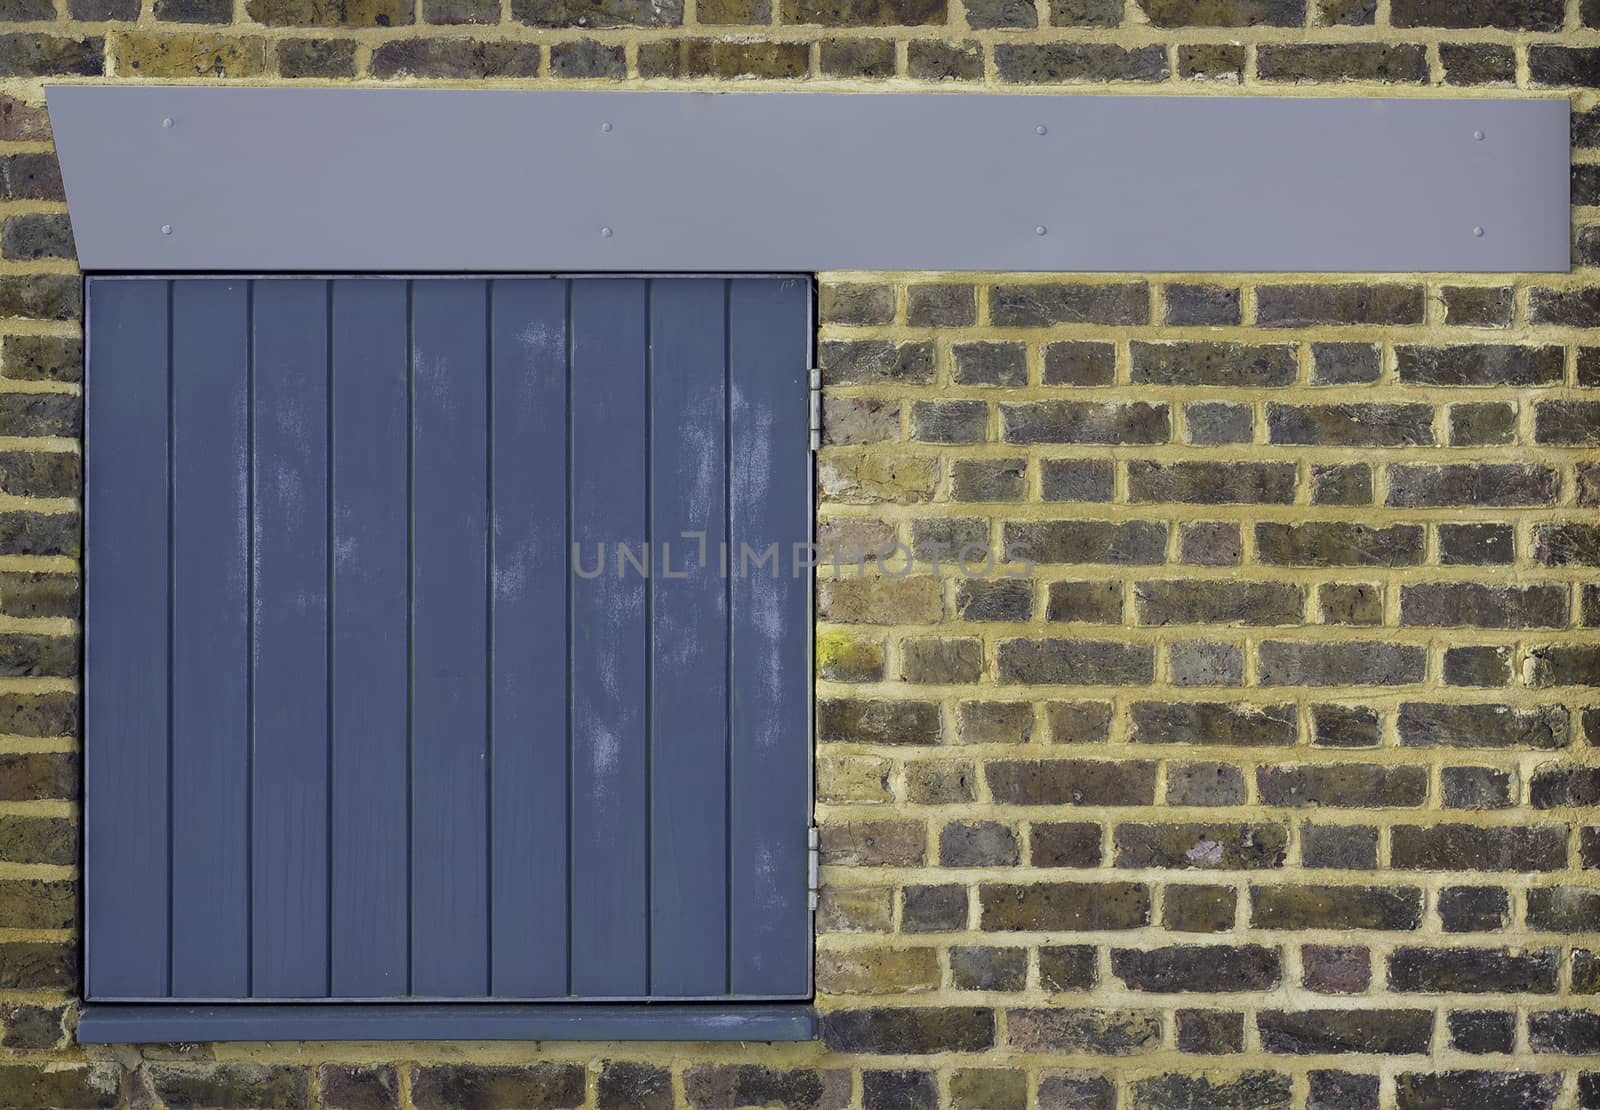 A clean brick wall with a small blue slatted door hatch and pleasing blue/grey beam across the top